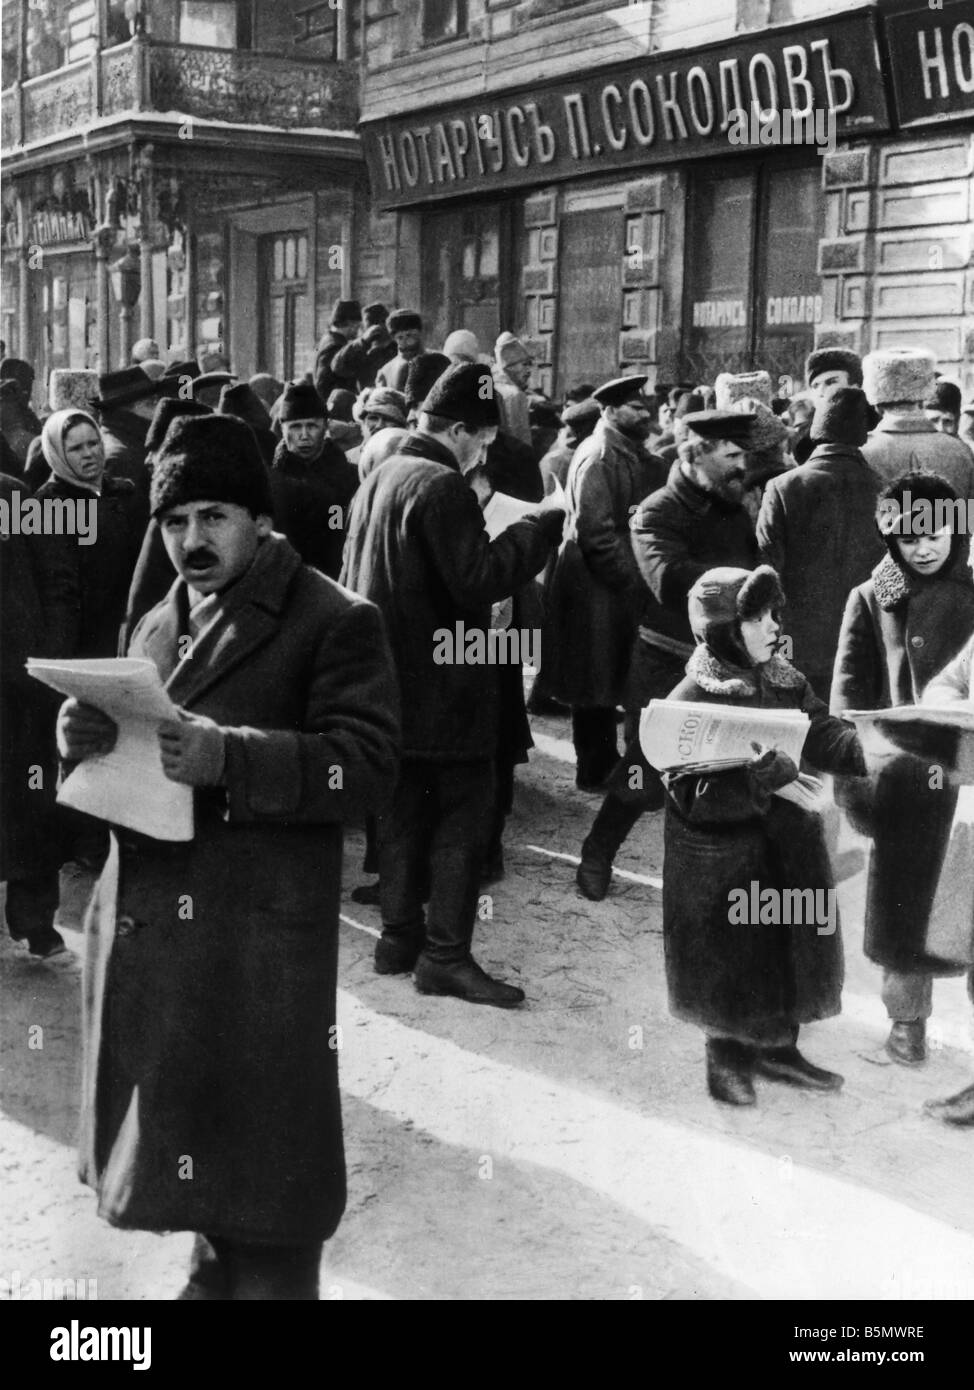 9RD 1917 3 12 A7 February Revolution 1917 February Revolution 12 March 27 Feb old style 1917 Petrograd Petersburg during the day Stock Photo